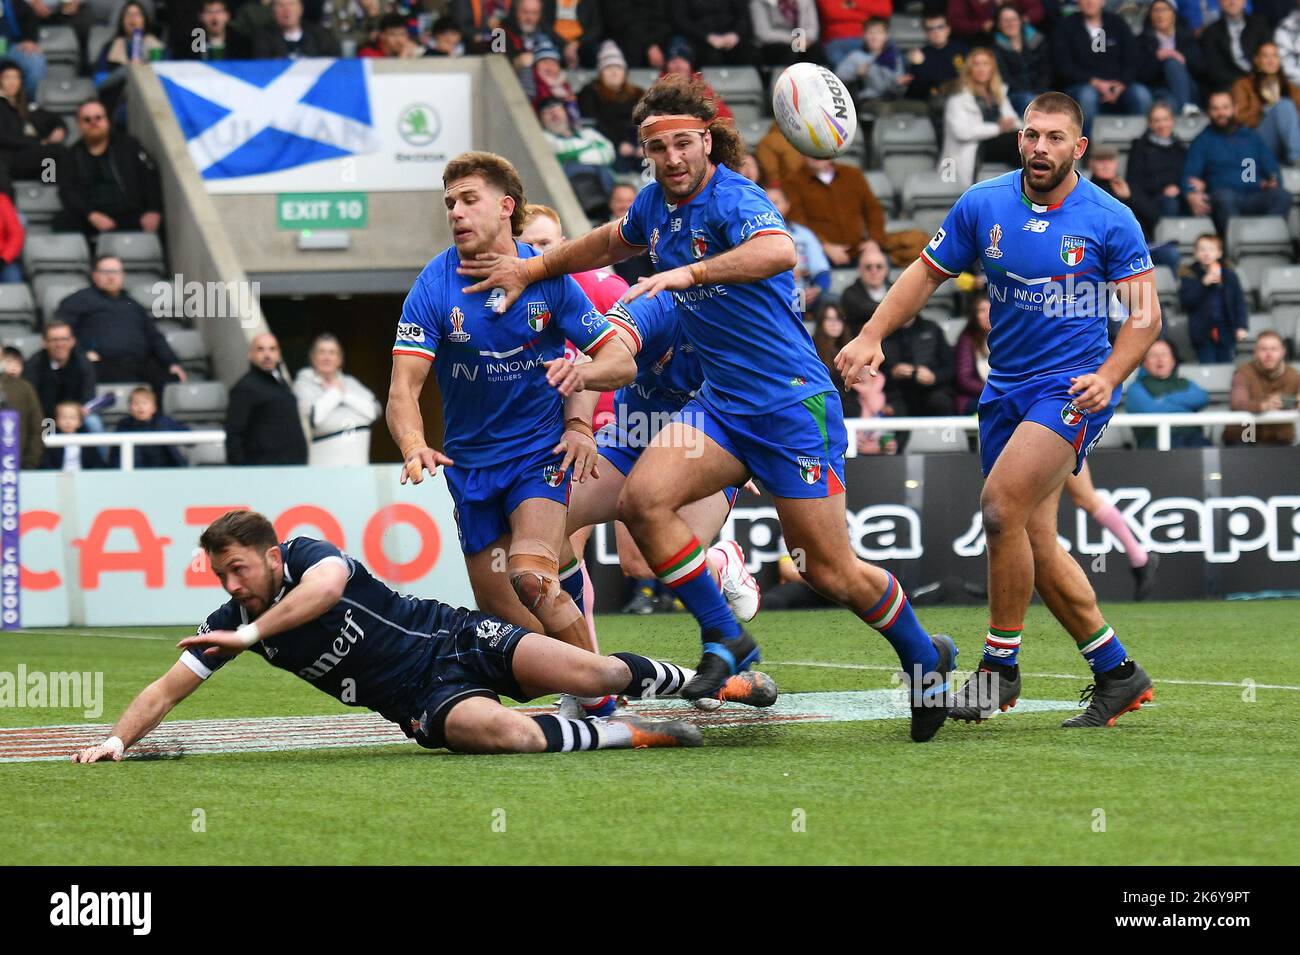 Newcastle, UK. 16th Oct, 2022. 16/10/2022 RLWC2021, Scotland v Italy, Kingston Park, Newcastle, Scotland fought hard for a try after Italy won the game 4-28, UK Credit: Robert Chambers/Alamy Live News Stock Photo